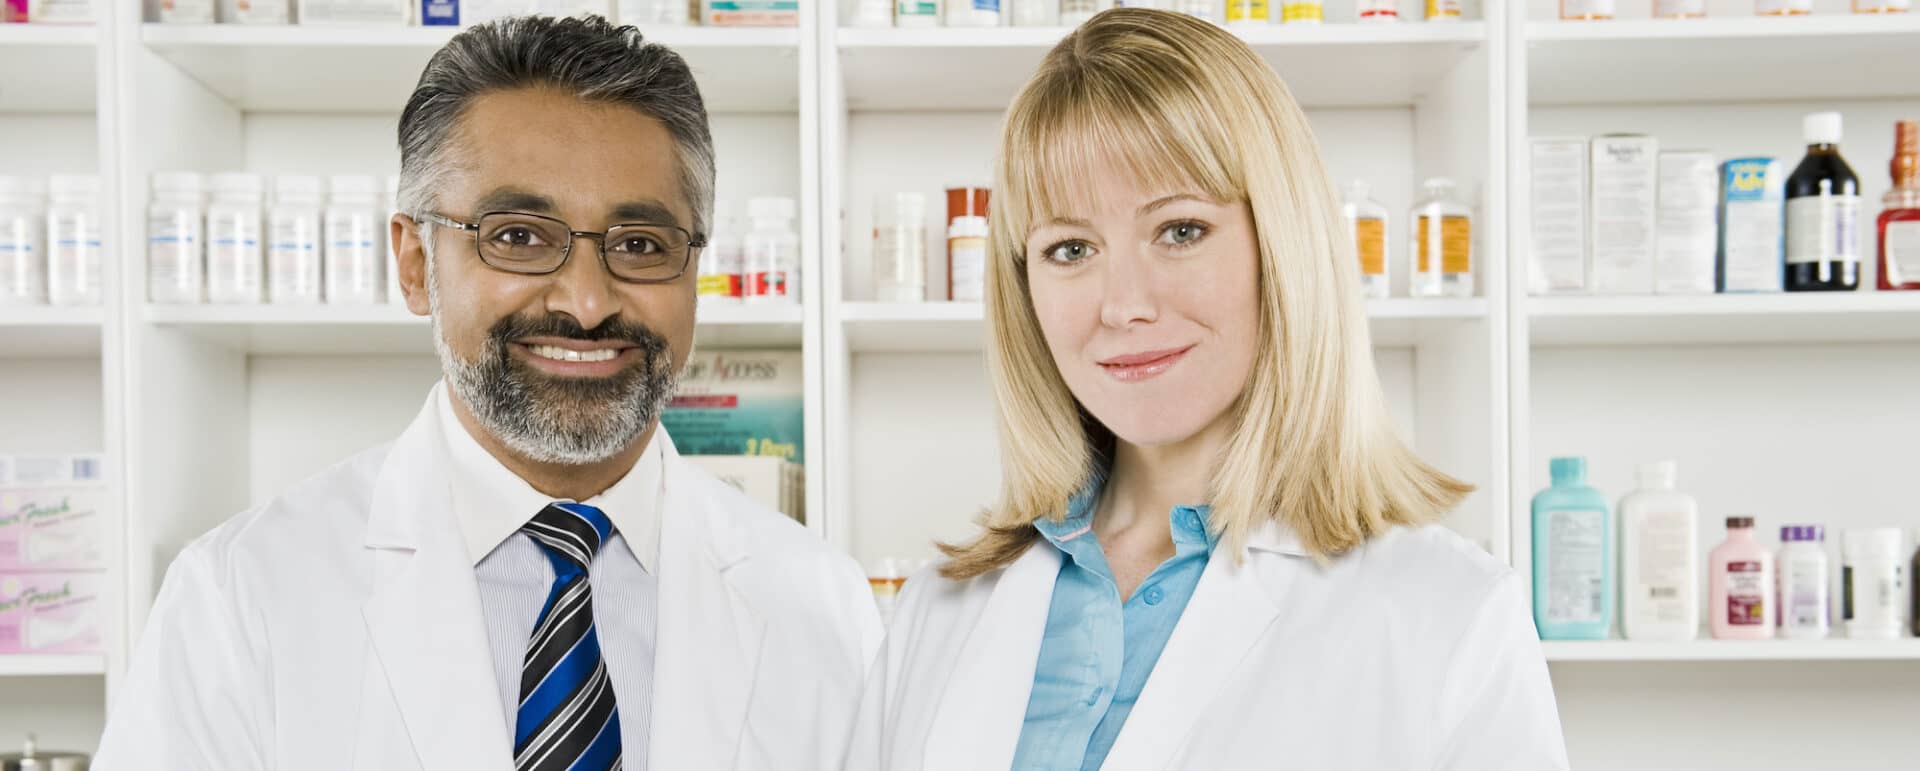 Portrait of a happy middle aged pharmacist standing with mature colleague at workplace